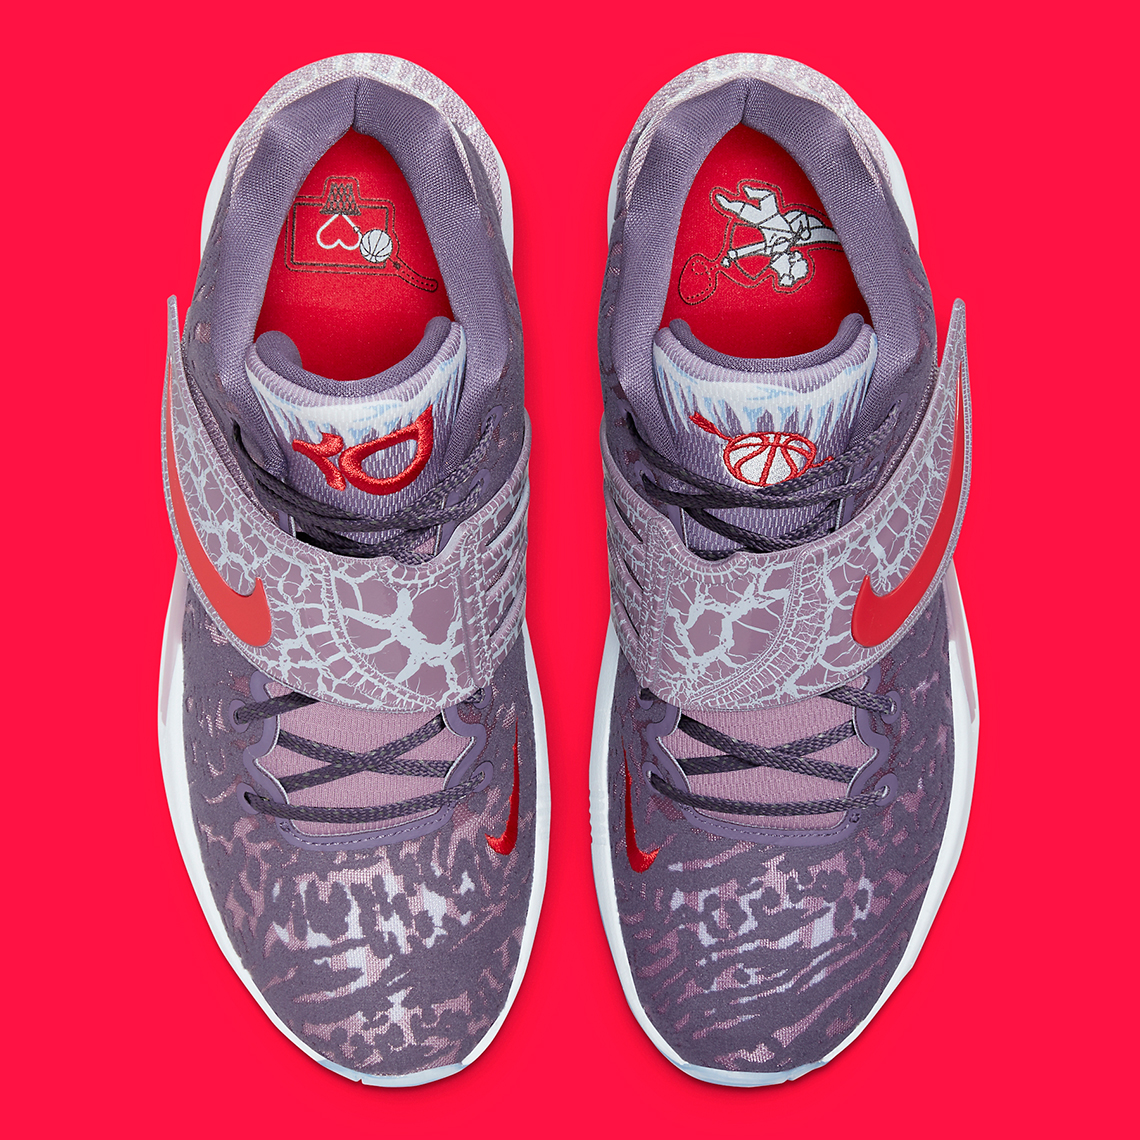 Nike Kd 14 Valentines Day Release Date 3